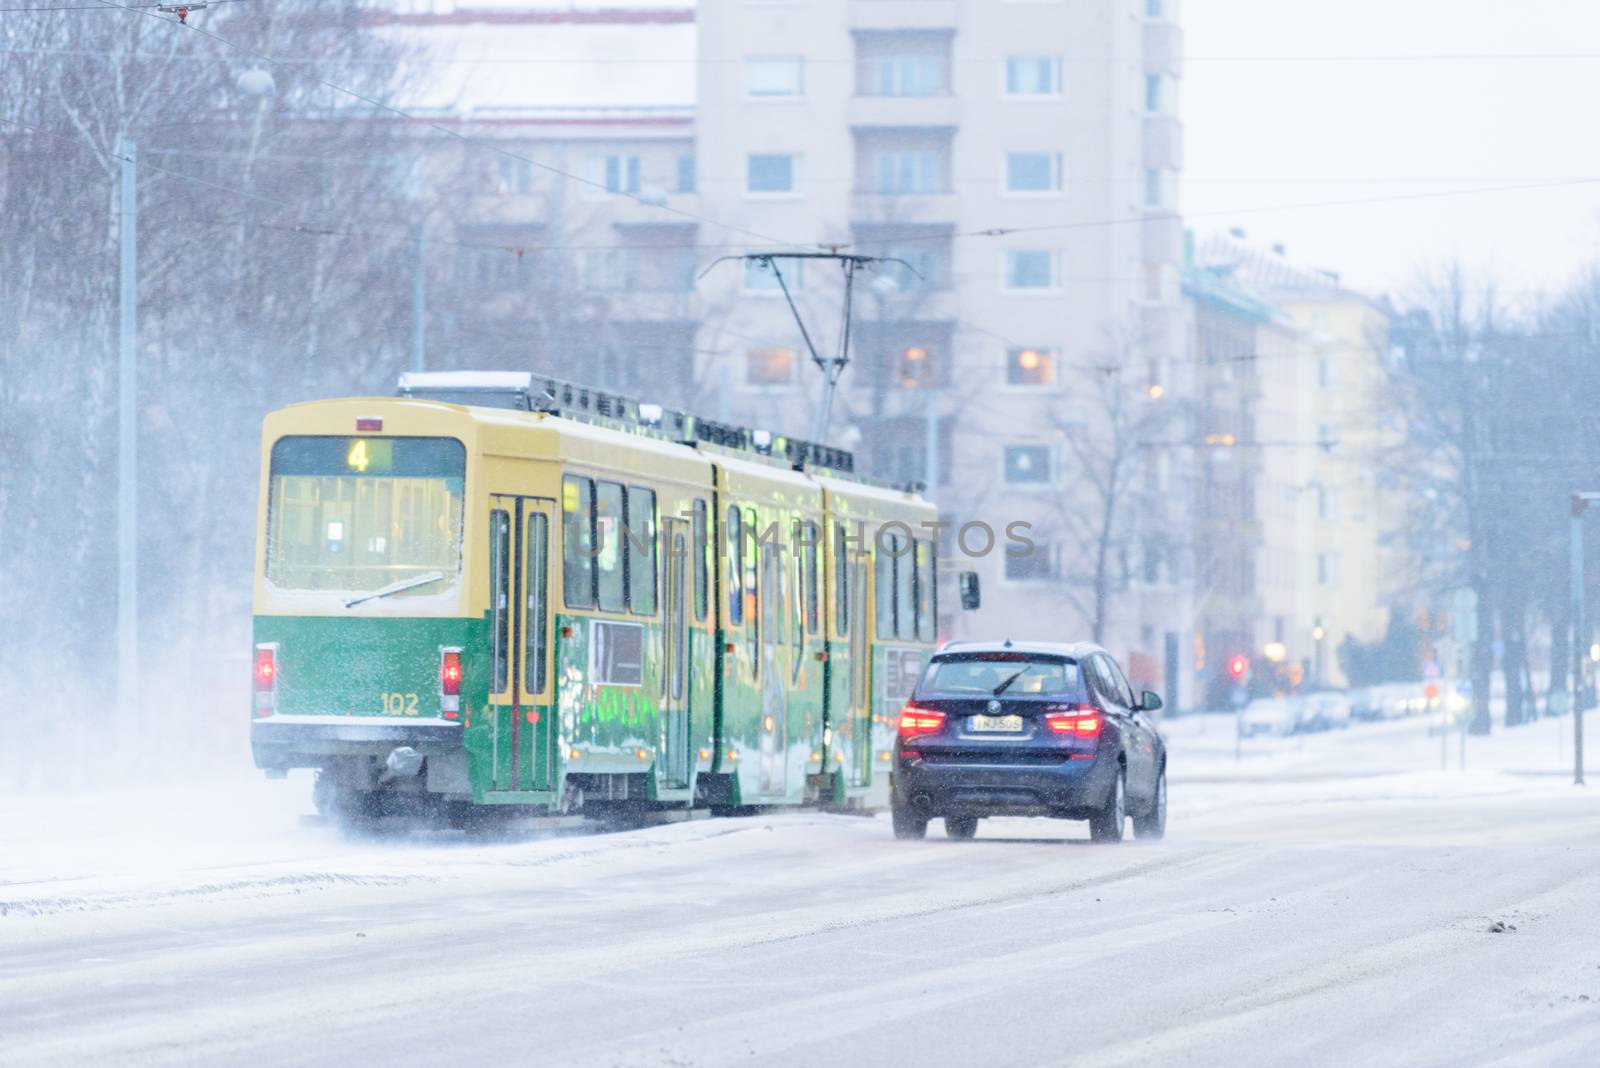 Editorial: Helsinki City, Finland, 21th December 2018. Train on the road with snow in winter season at Helsinki, Finland.